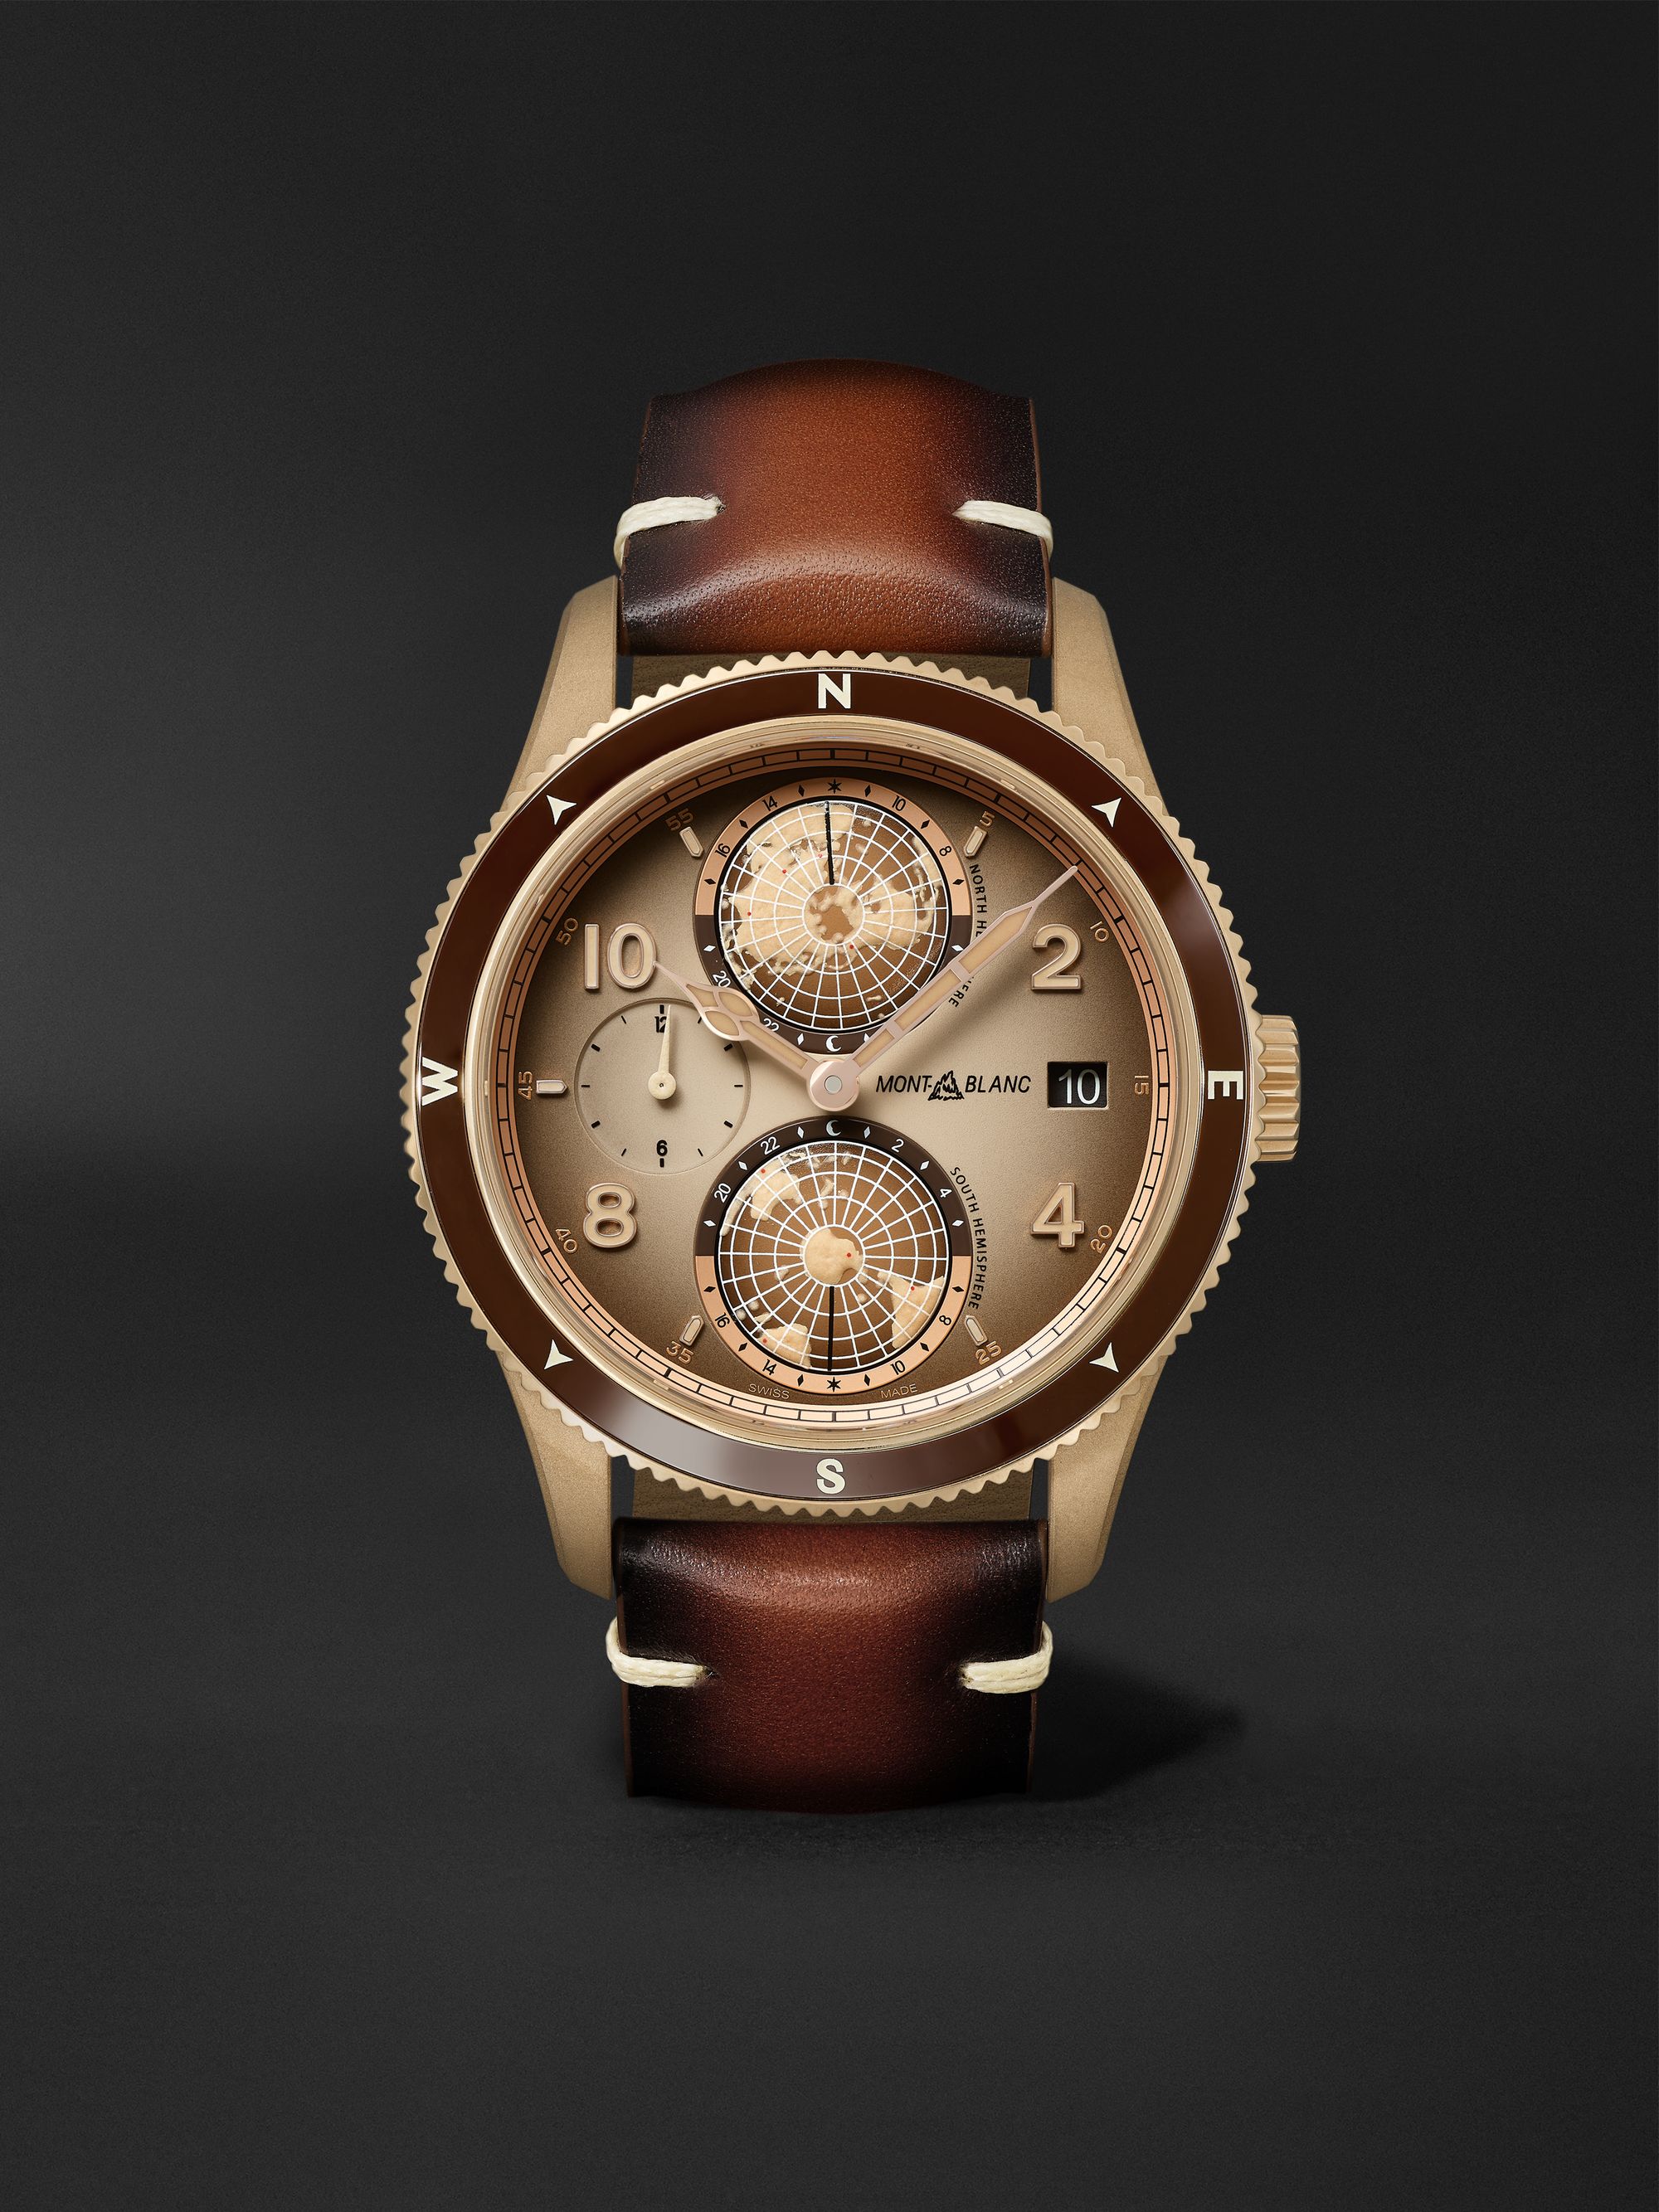 MONTBLANC 1858 Geosphere Limited Edition Automatic 42mm Bronze and Leather Watch, Ref. No. 128504